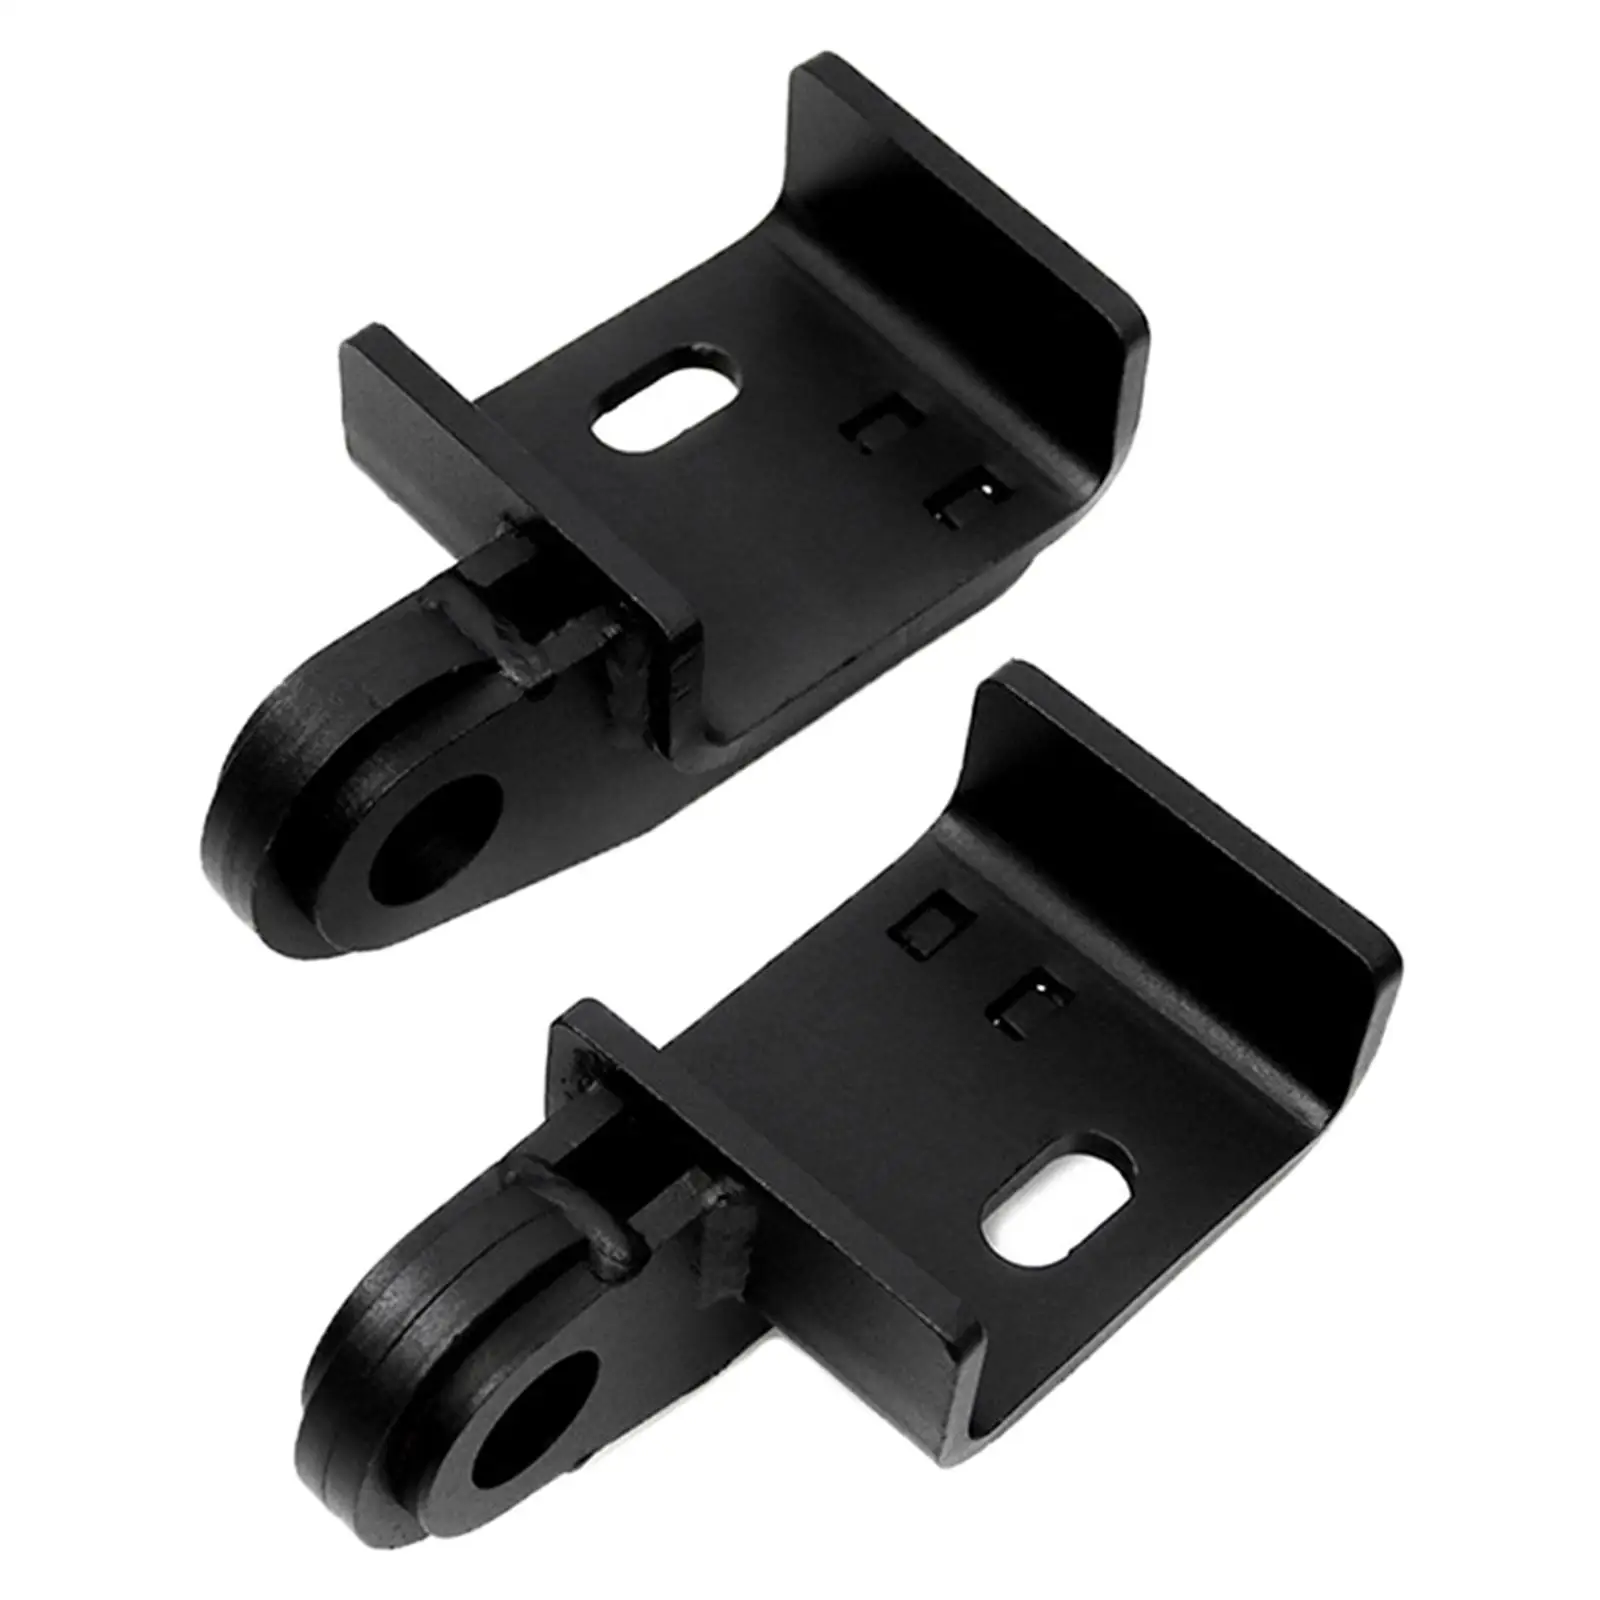 2x Auto Front Tow Hook Mounting Bracket Front Bumper Relocator Mount Adapter D Ring Shackle Bracket for Metal Sturdy